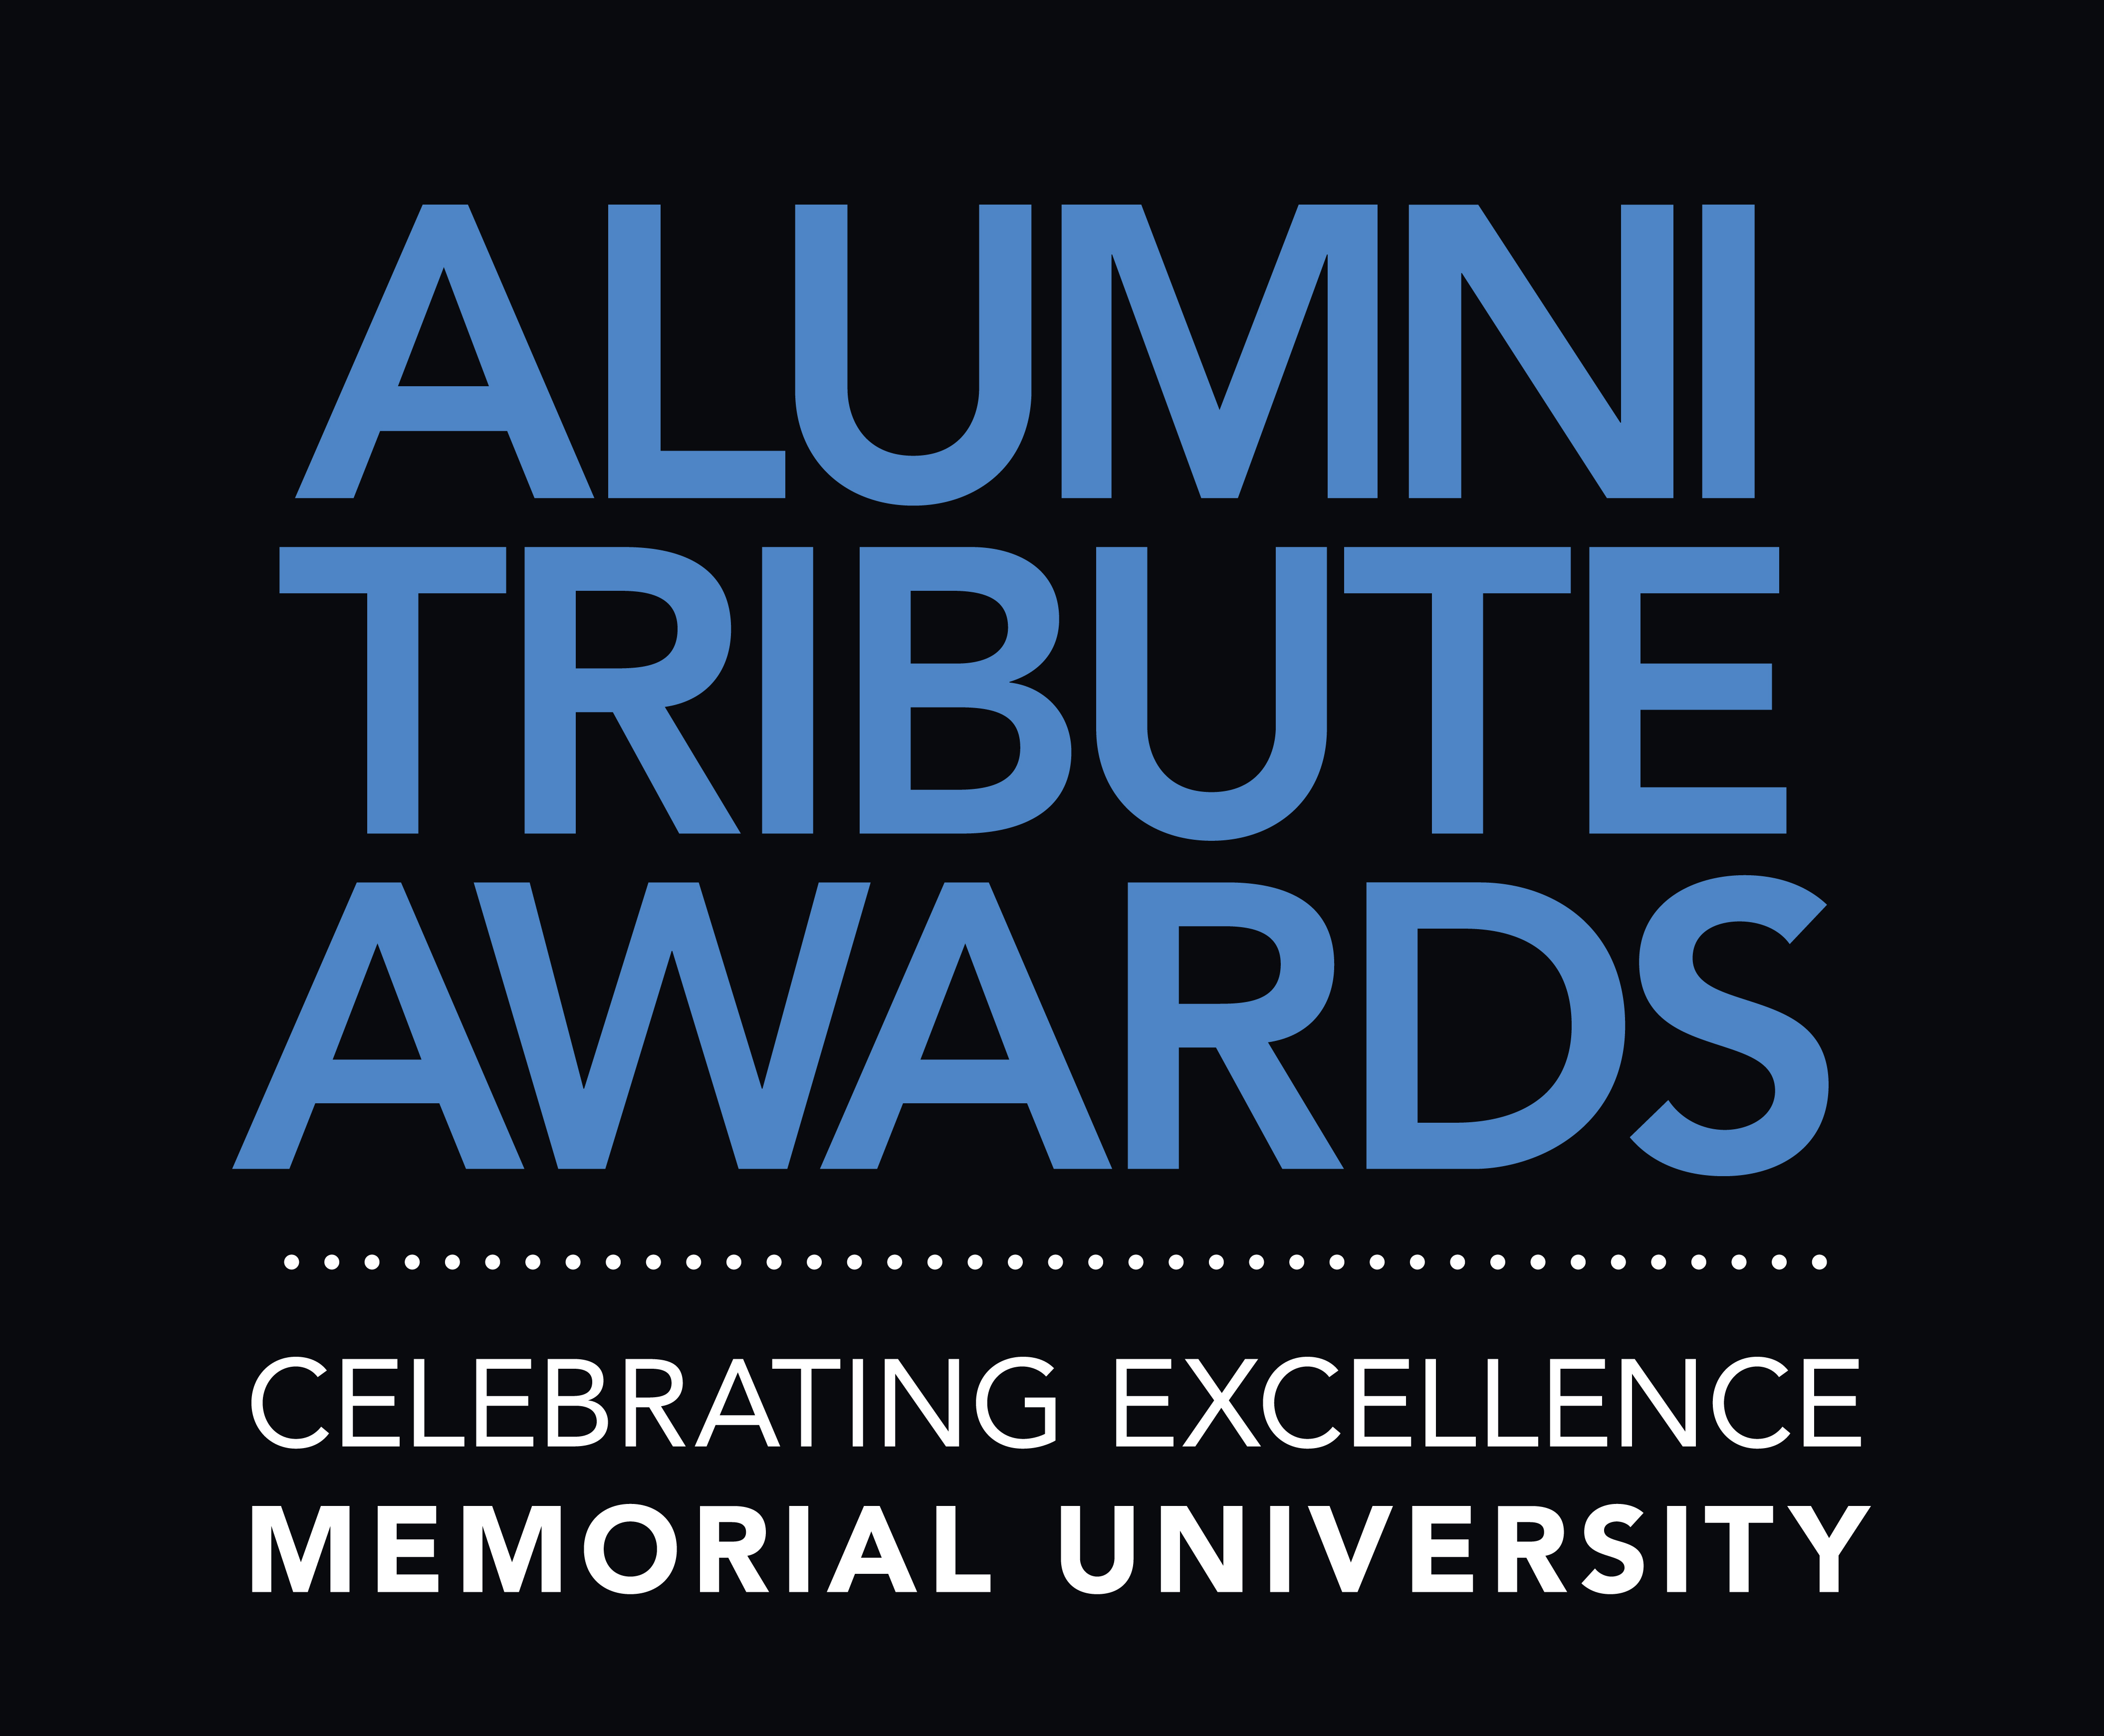 Nominations for the Alumni Tribute Awards close May 30.